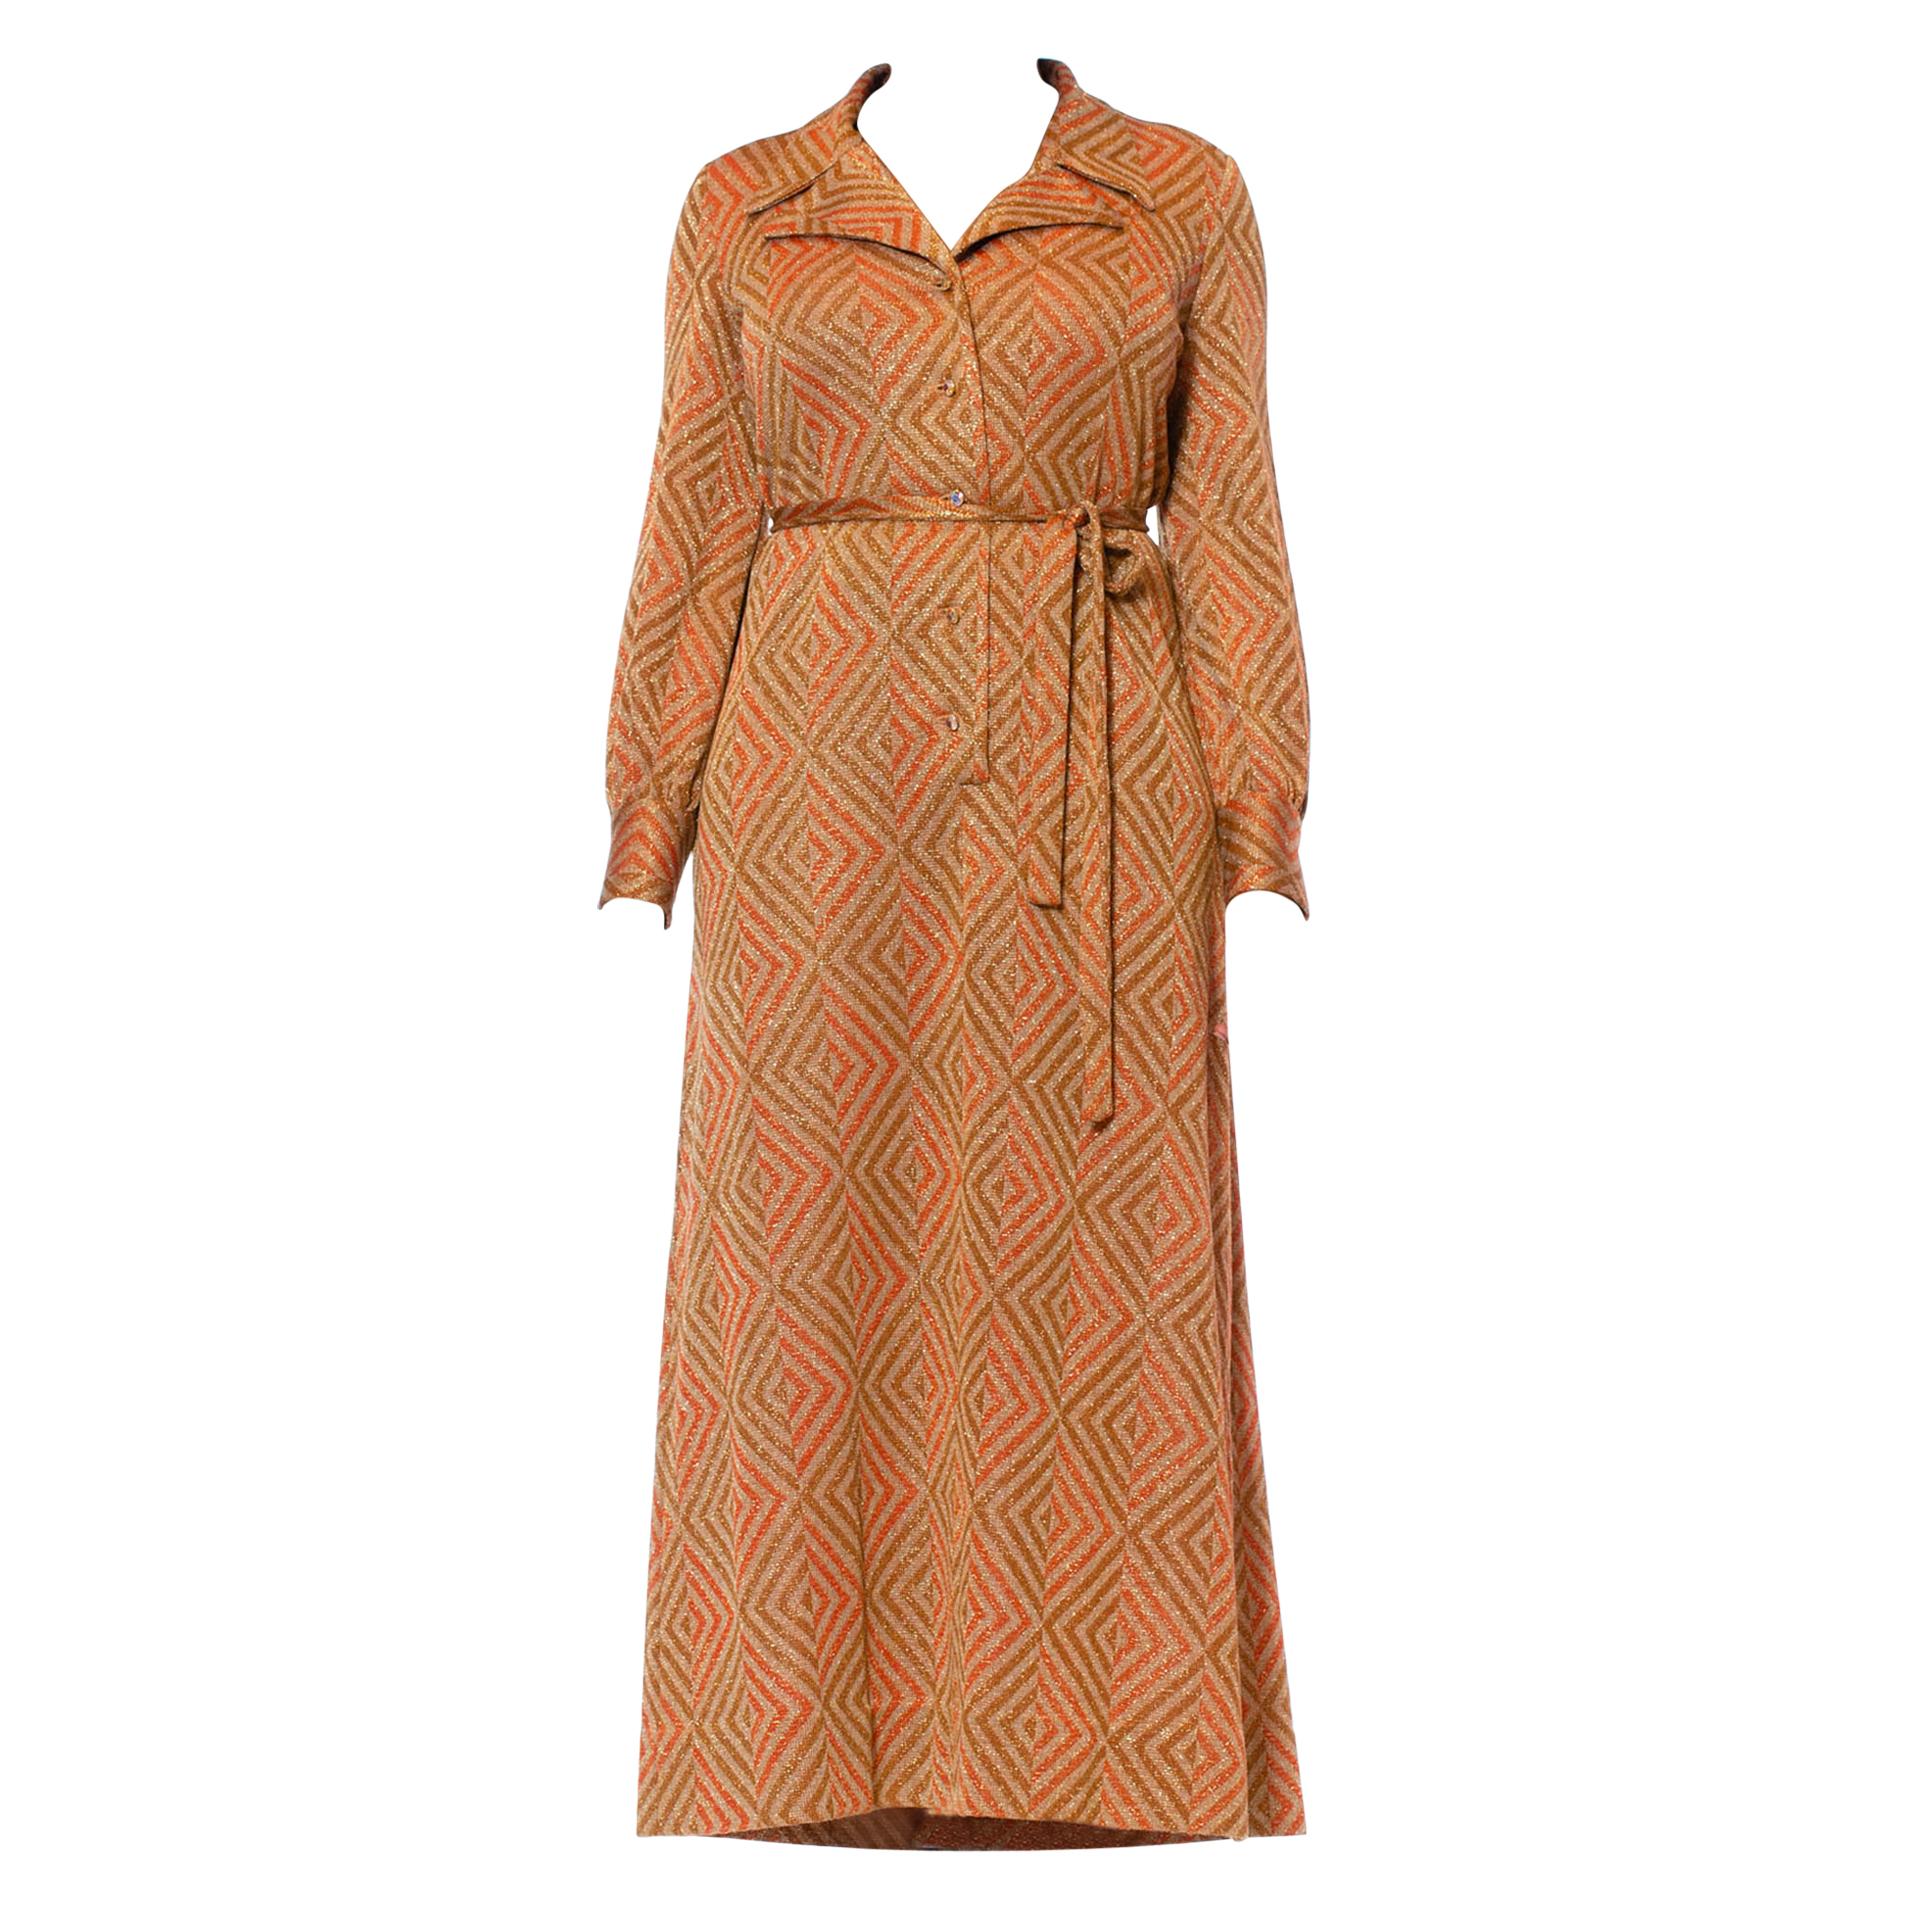 1970S Cinnamon Brown & Orange Poly/Lurex Double Knit Long Sleeved Maxi Cocktail